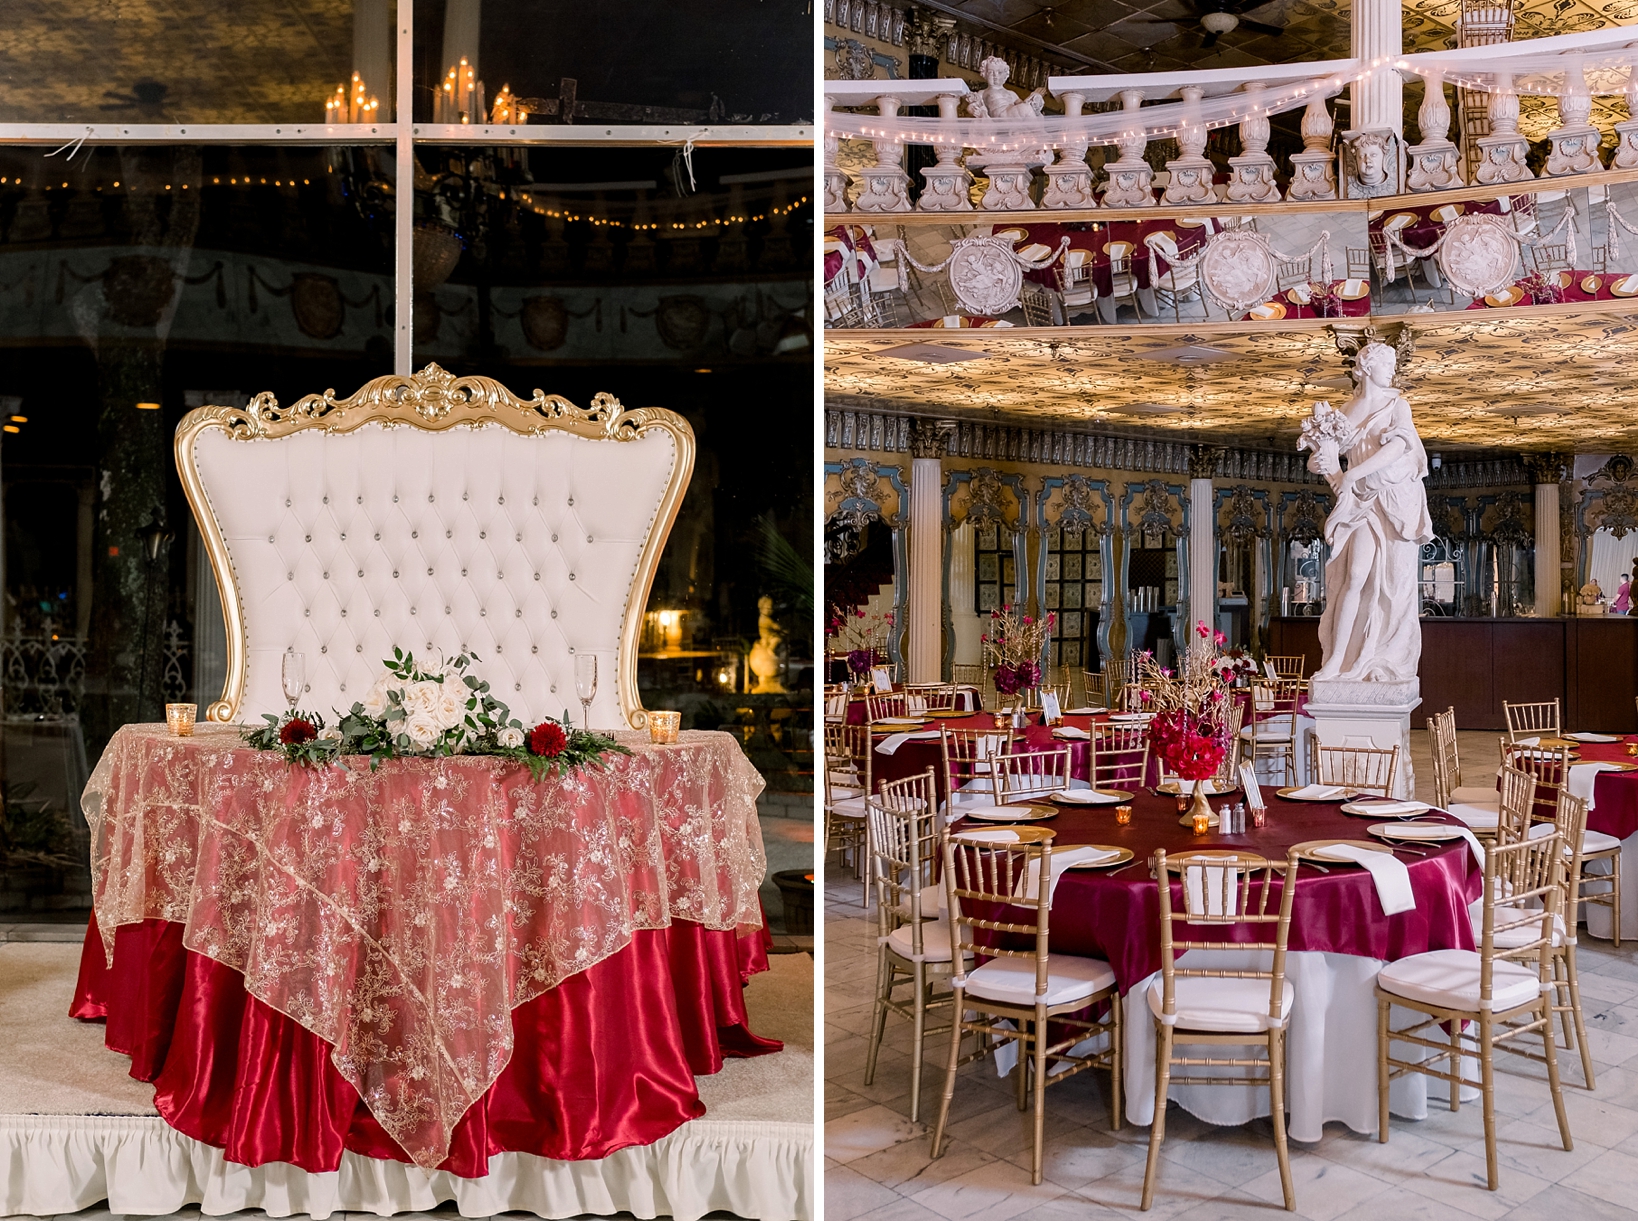 A huge sweetheart table chair and some guest seating surrounded by statues and wall mosaics by Sarah & Ben Photography